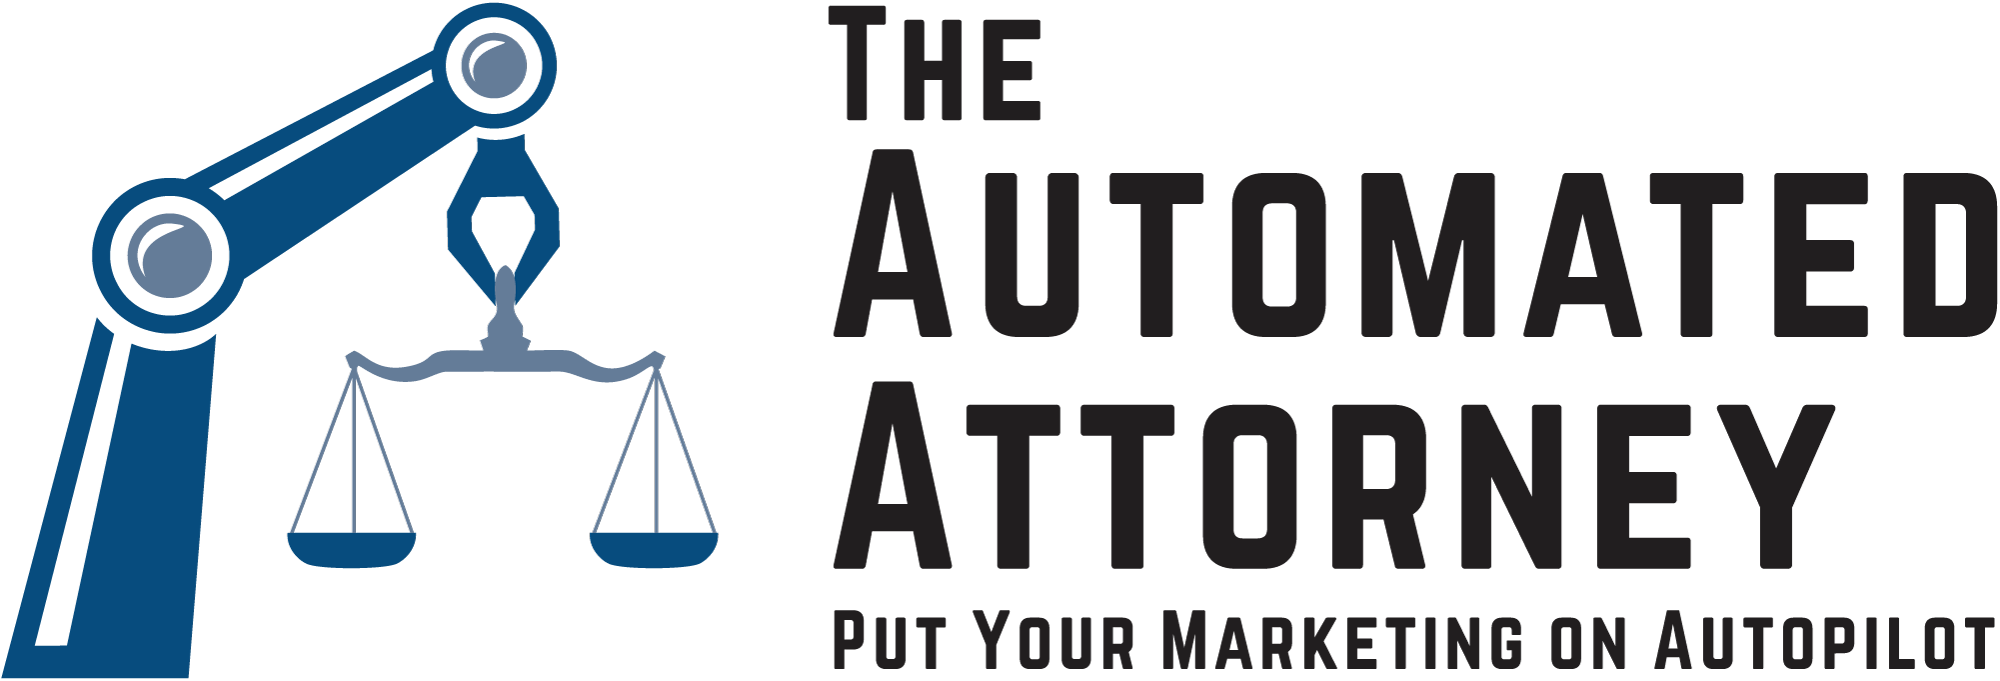 The Automated Attorney Logo PNG blue